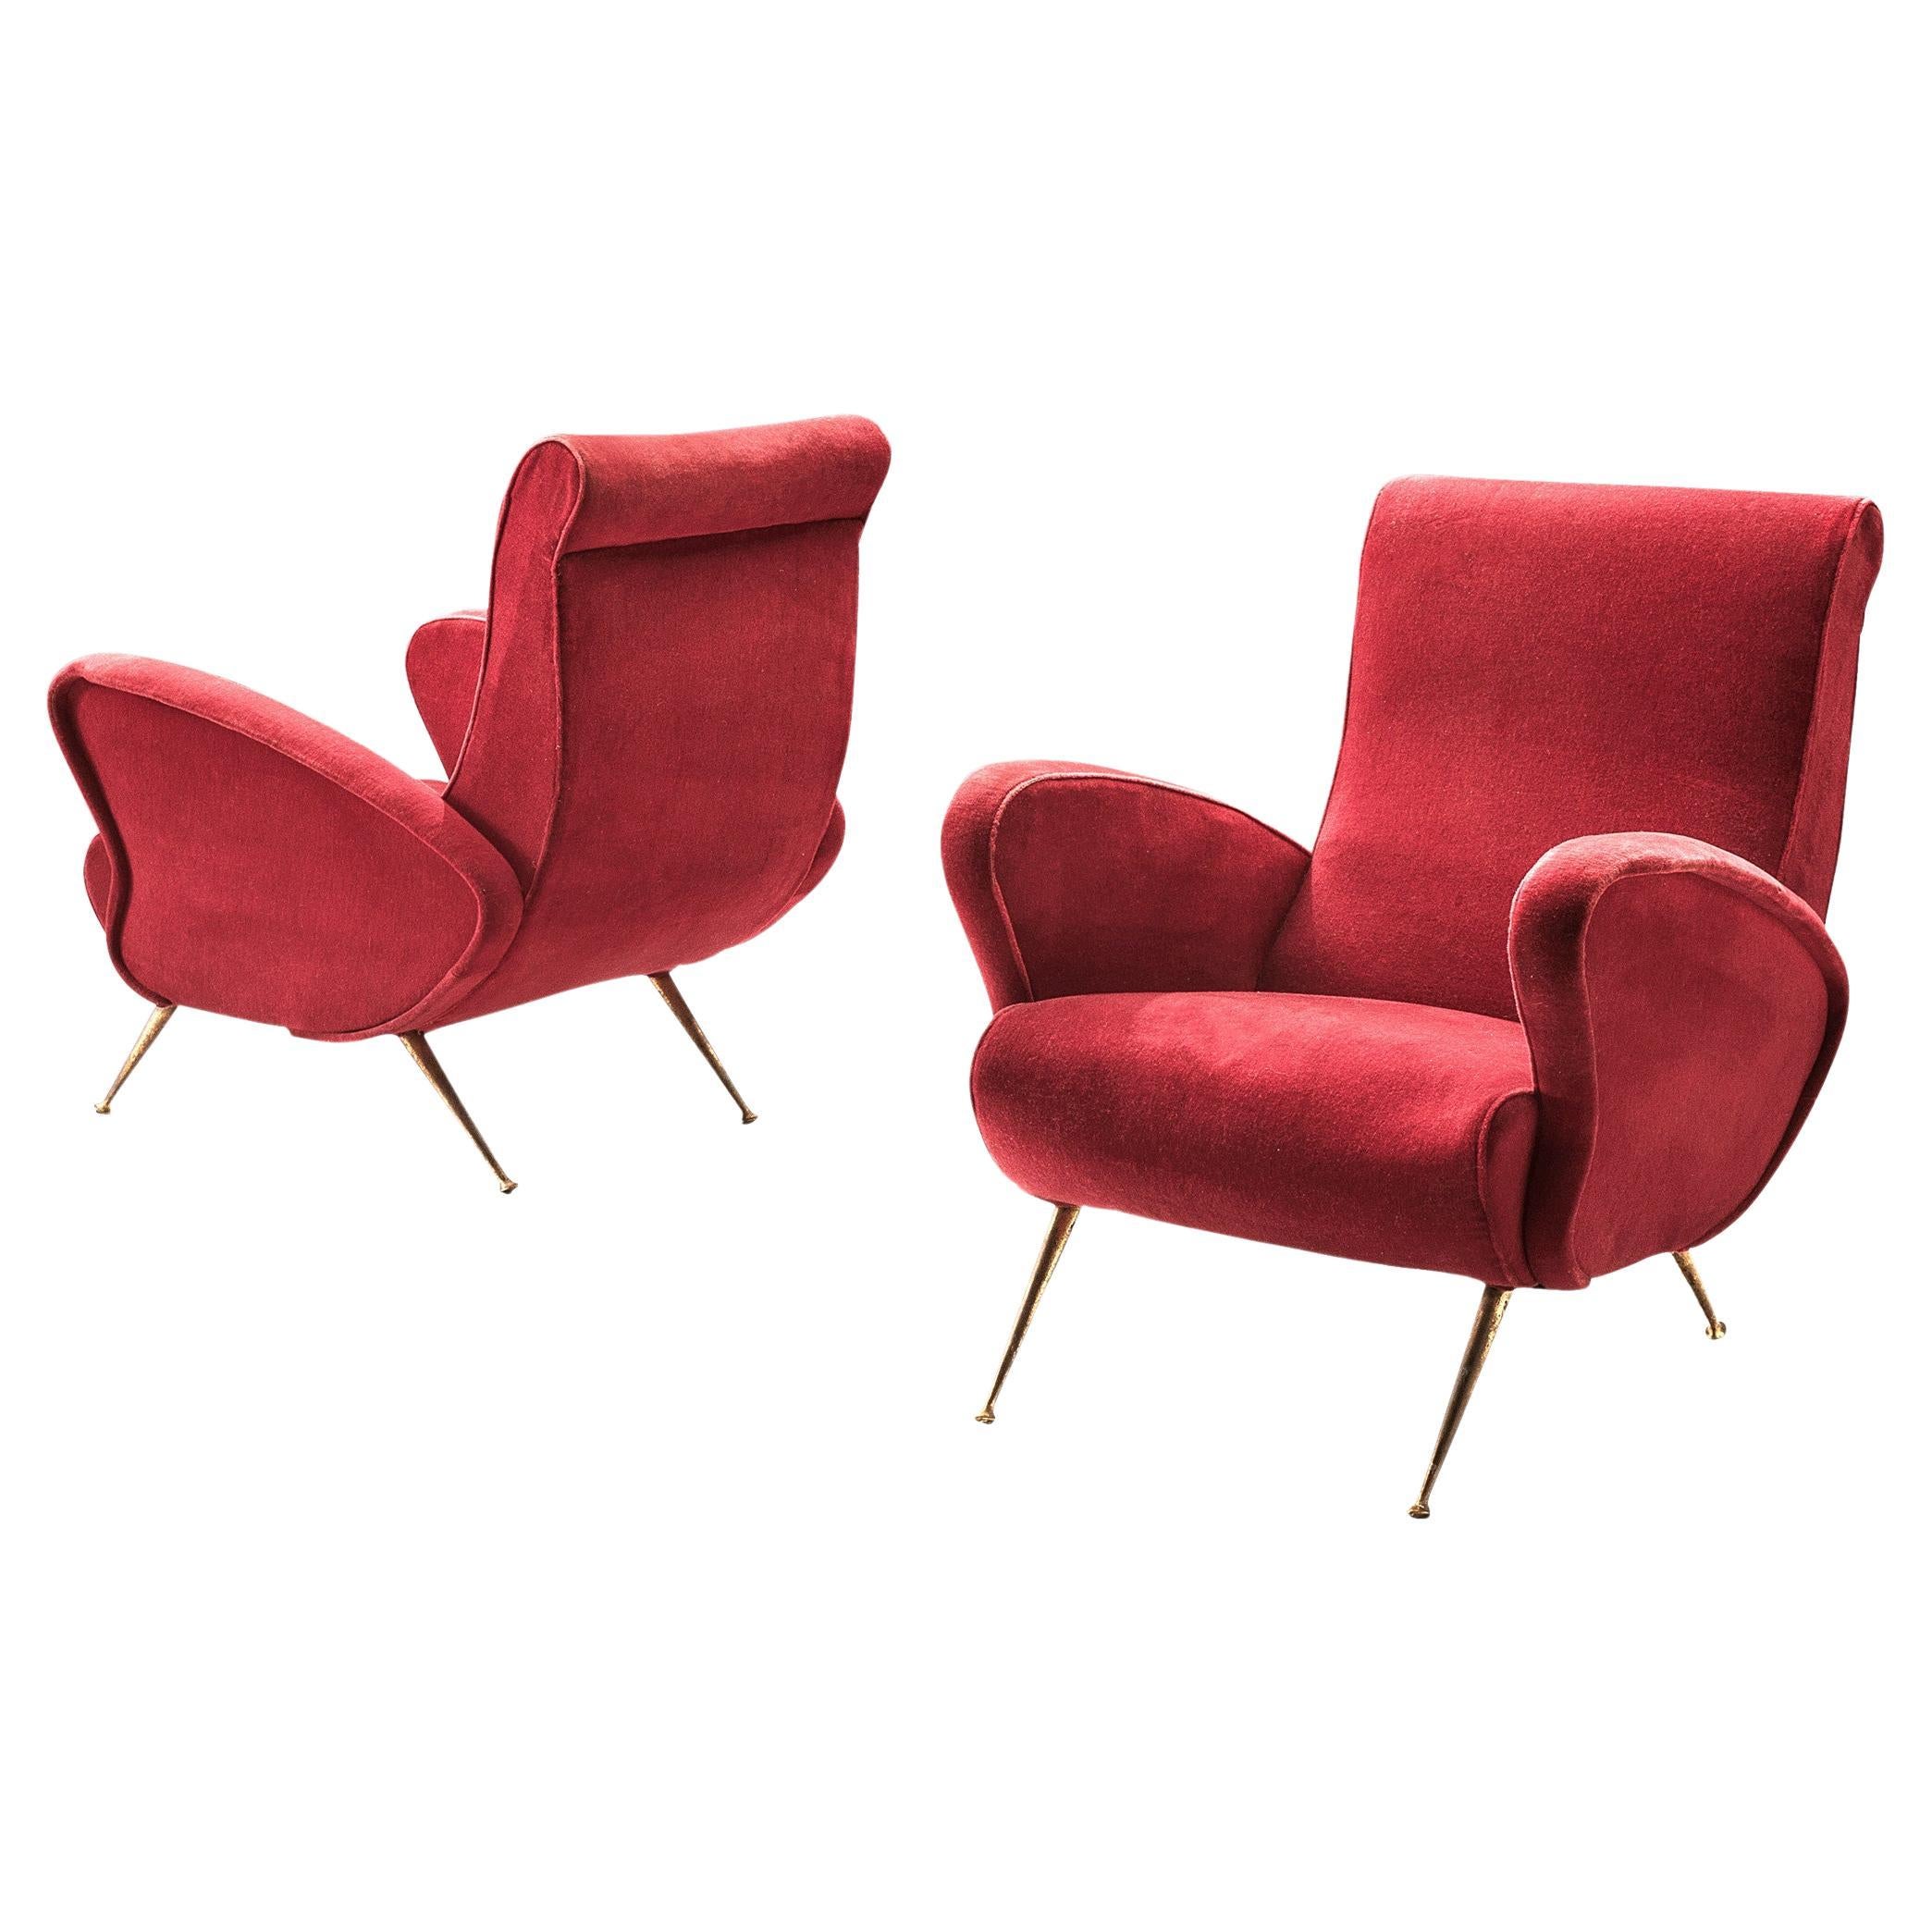 Italian Pair of Sculptural Lounge Chairs in Red Velvet and Brass